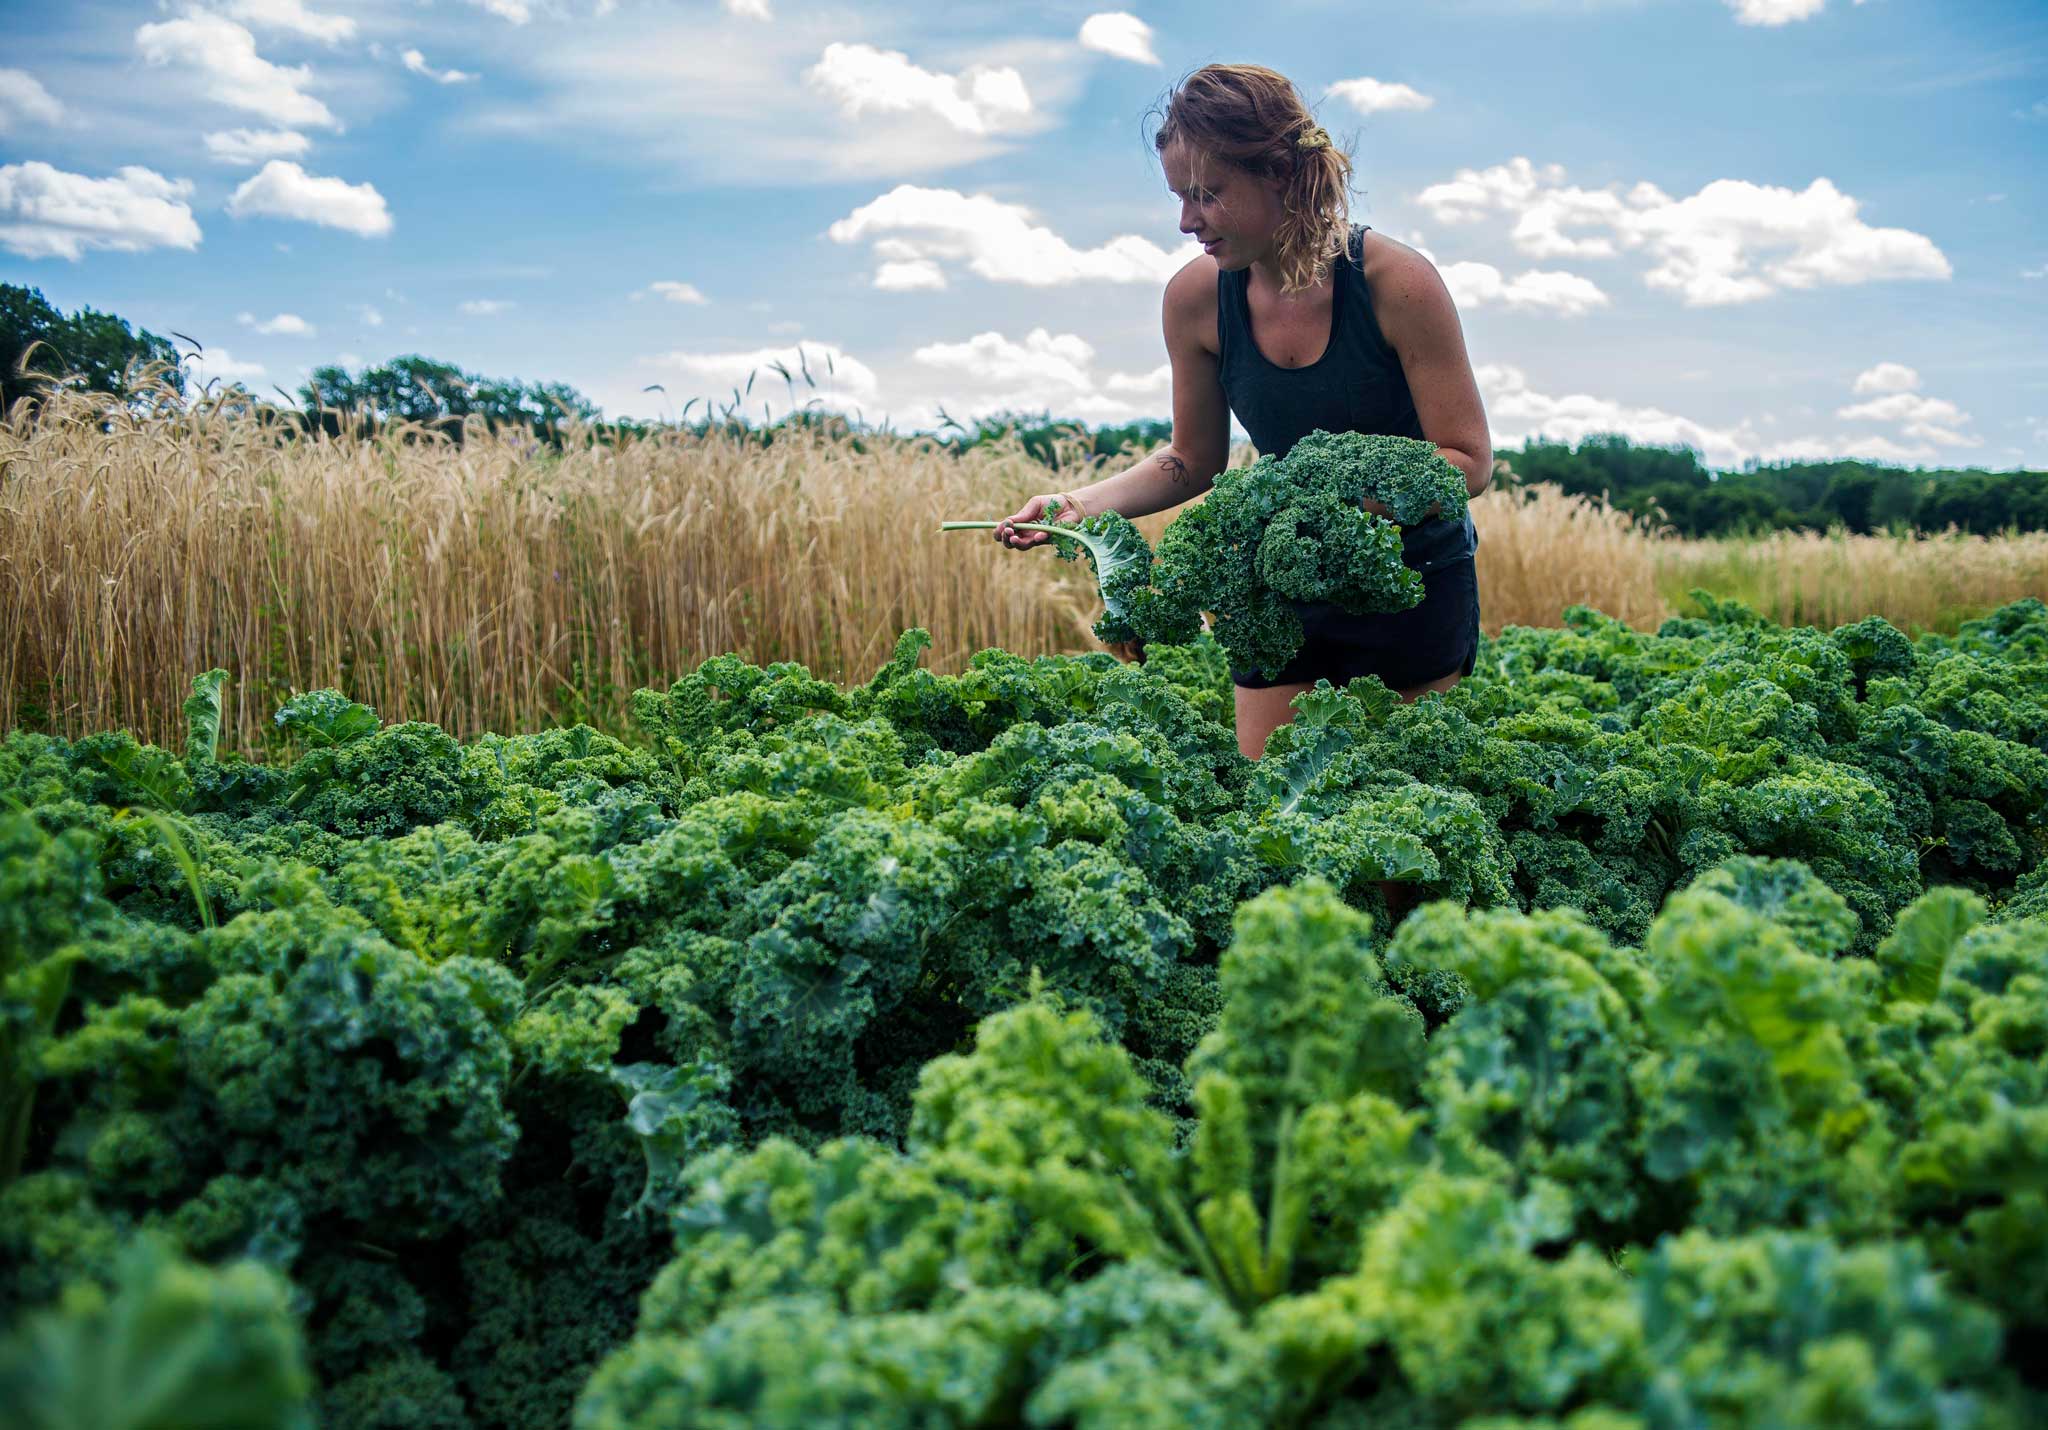 Photo of a woman harvesting kale in a sunny farm field.